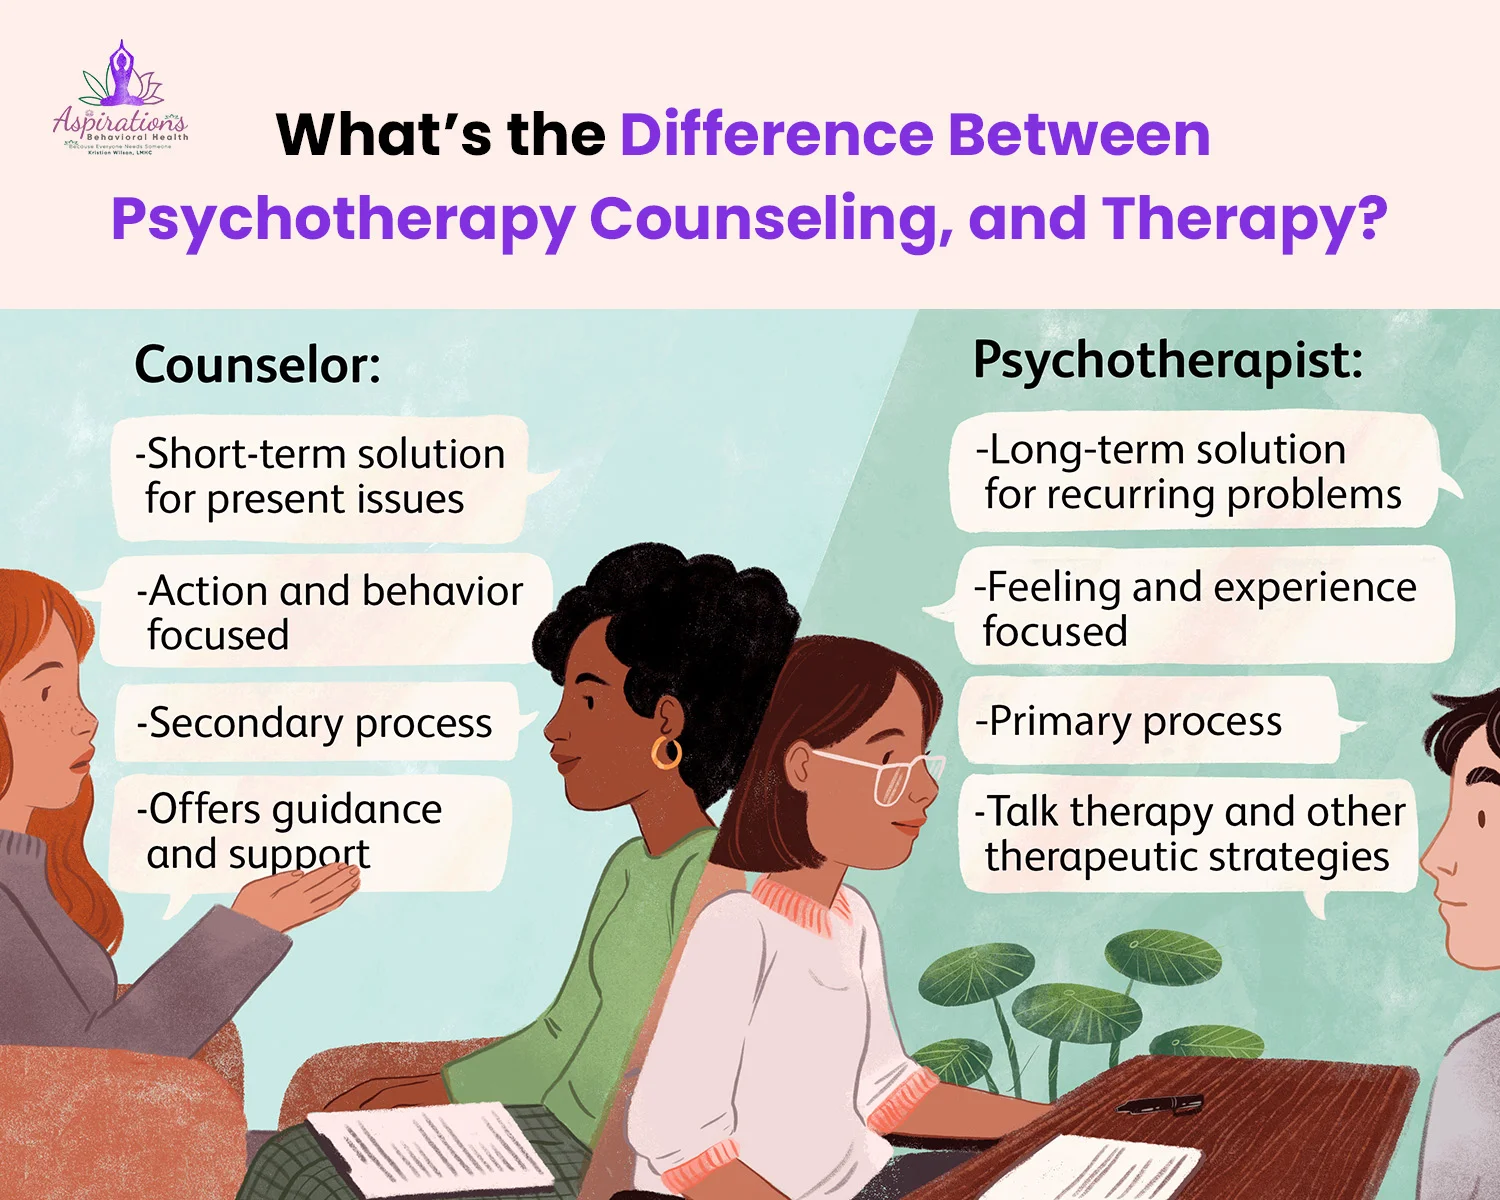 What’s the Difference Between Psychotherapy, Counseling, and Therapy?